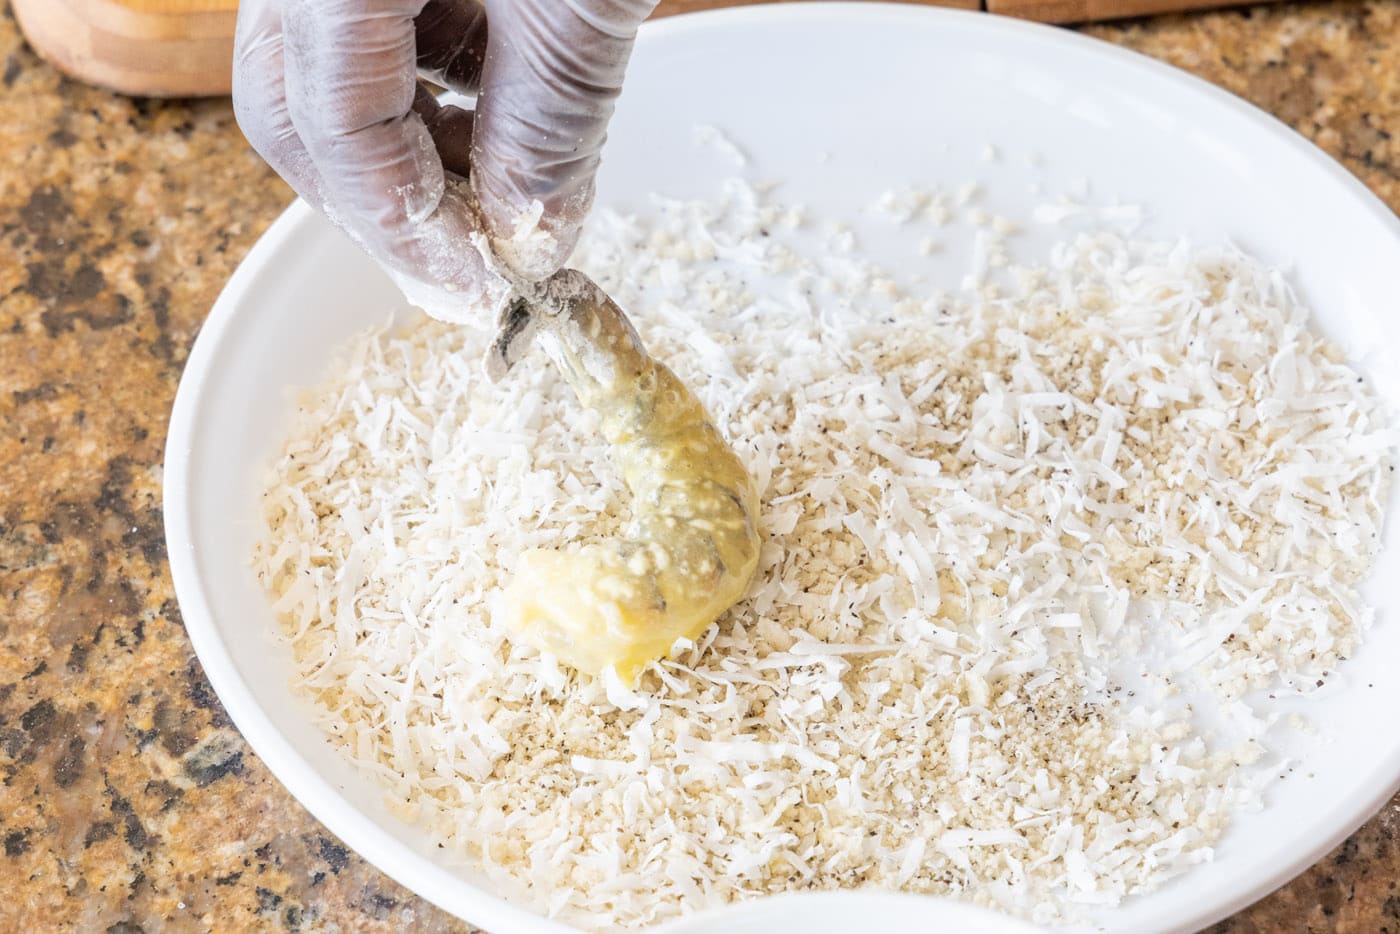 pressing flour and egg coated shrimp into coconut and breadcrumbs